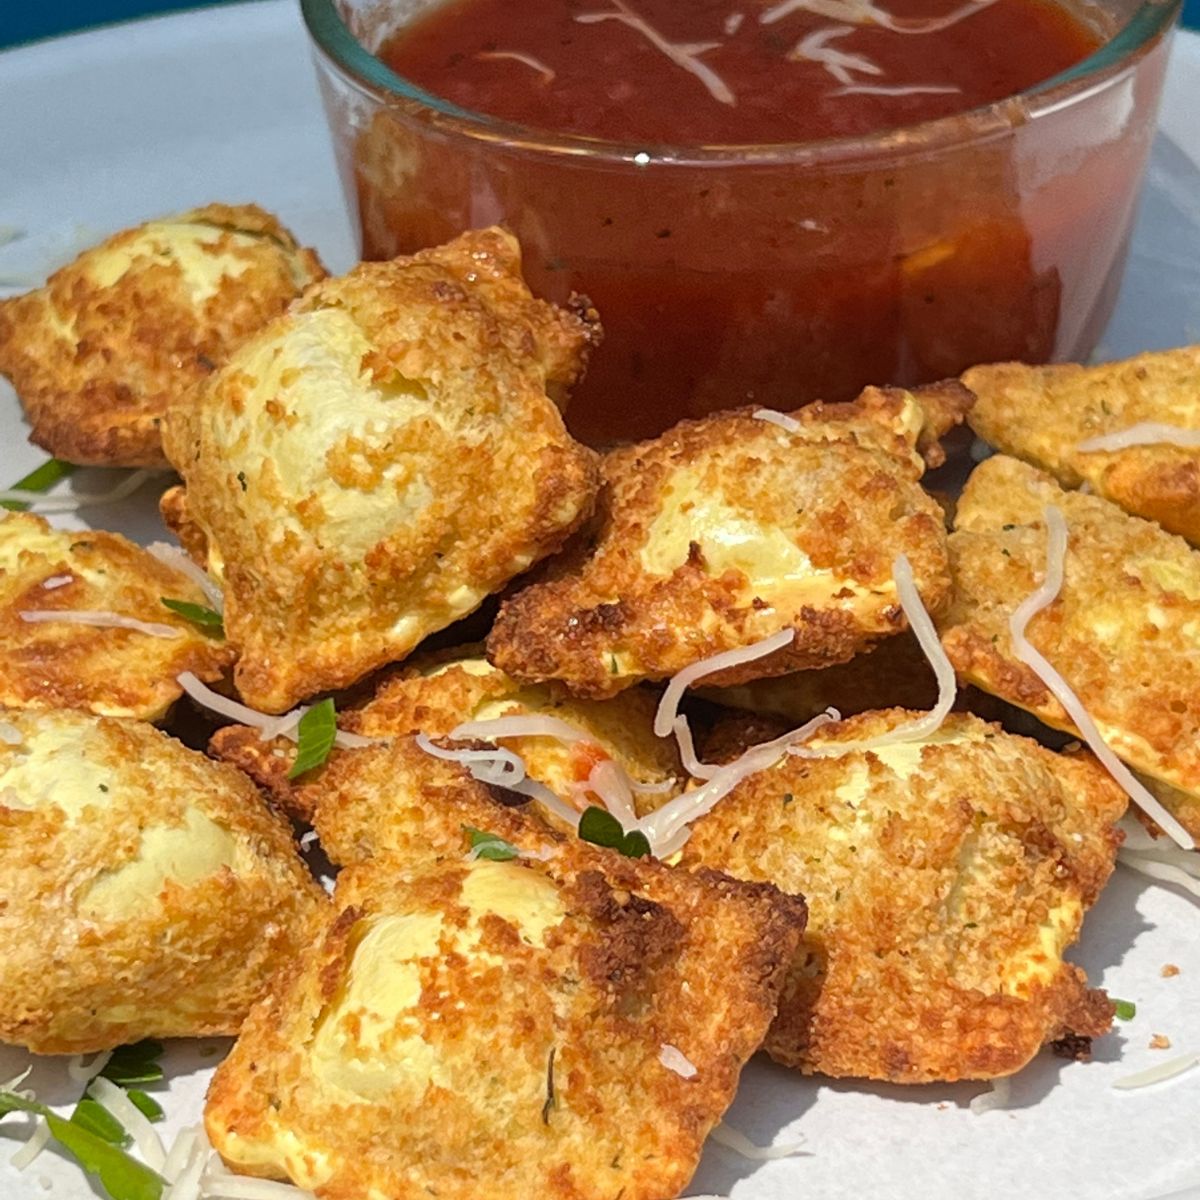 A plateful of air fried toasted raviolis with a side of marinara sauce